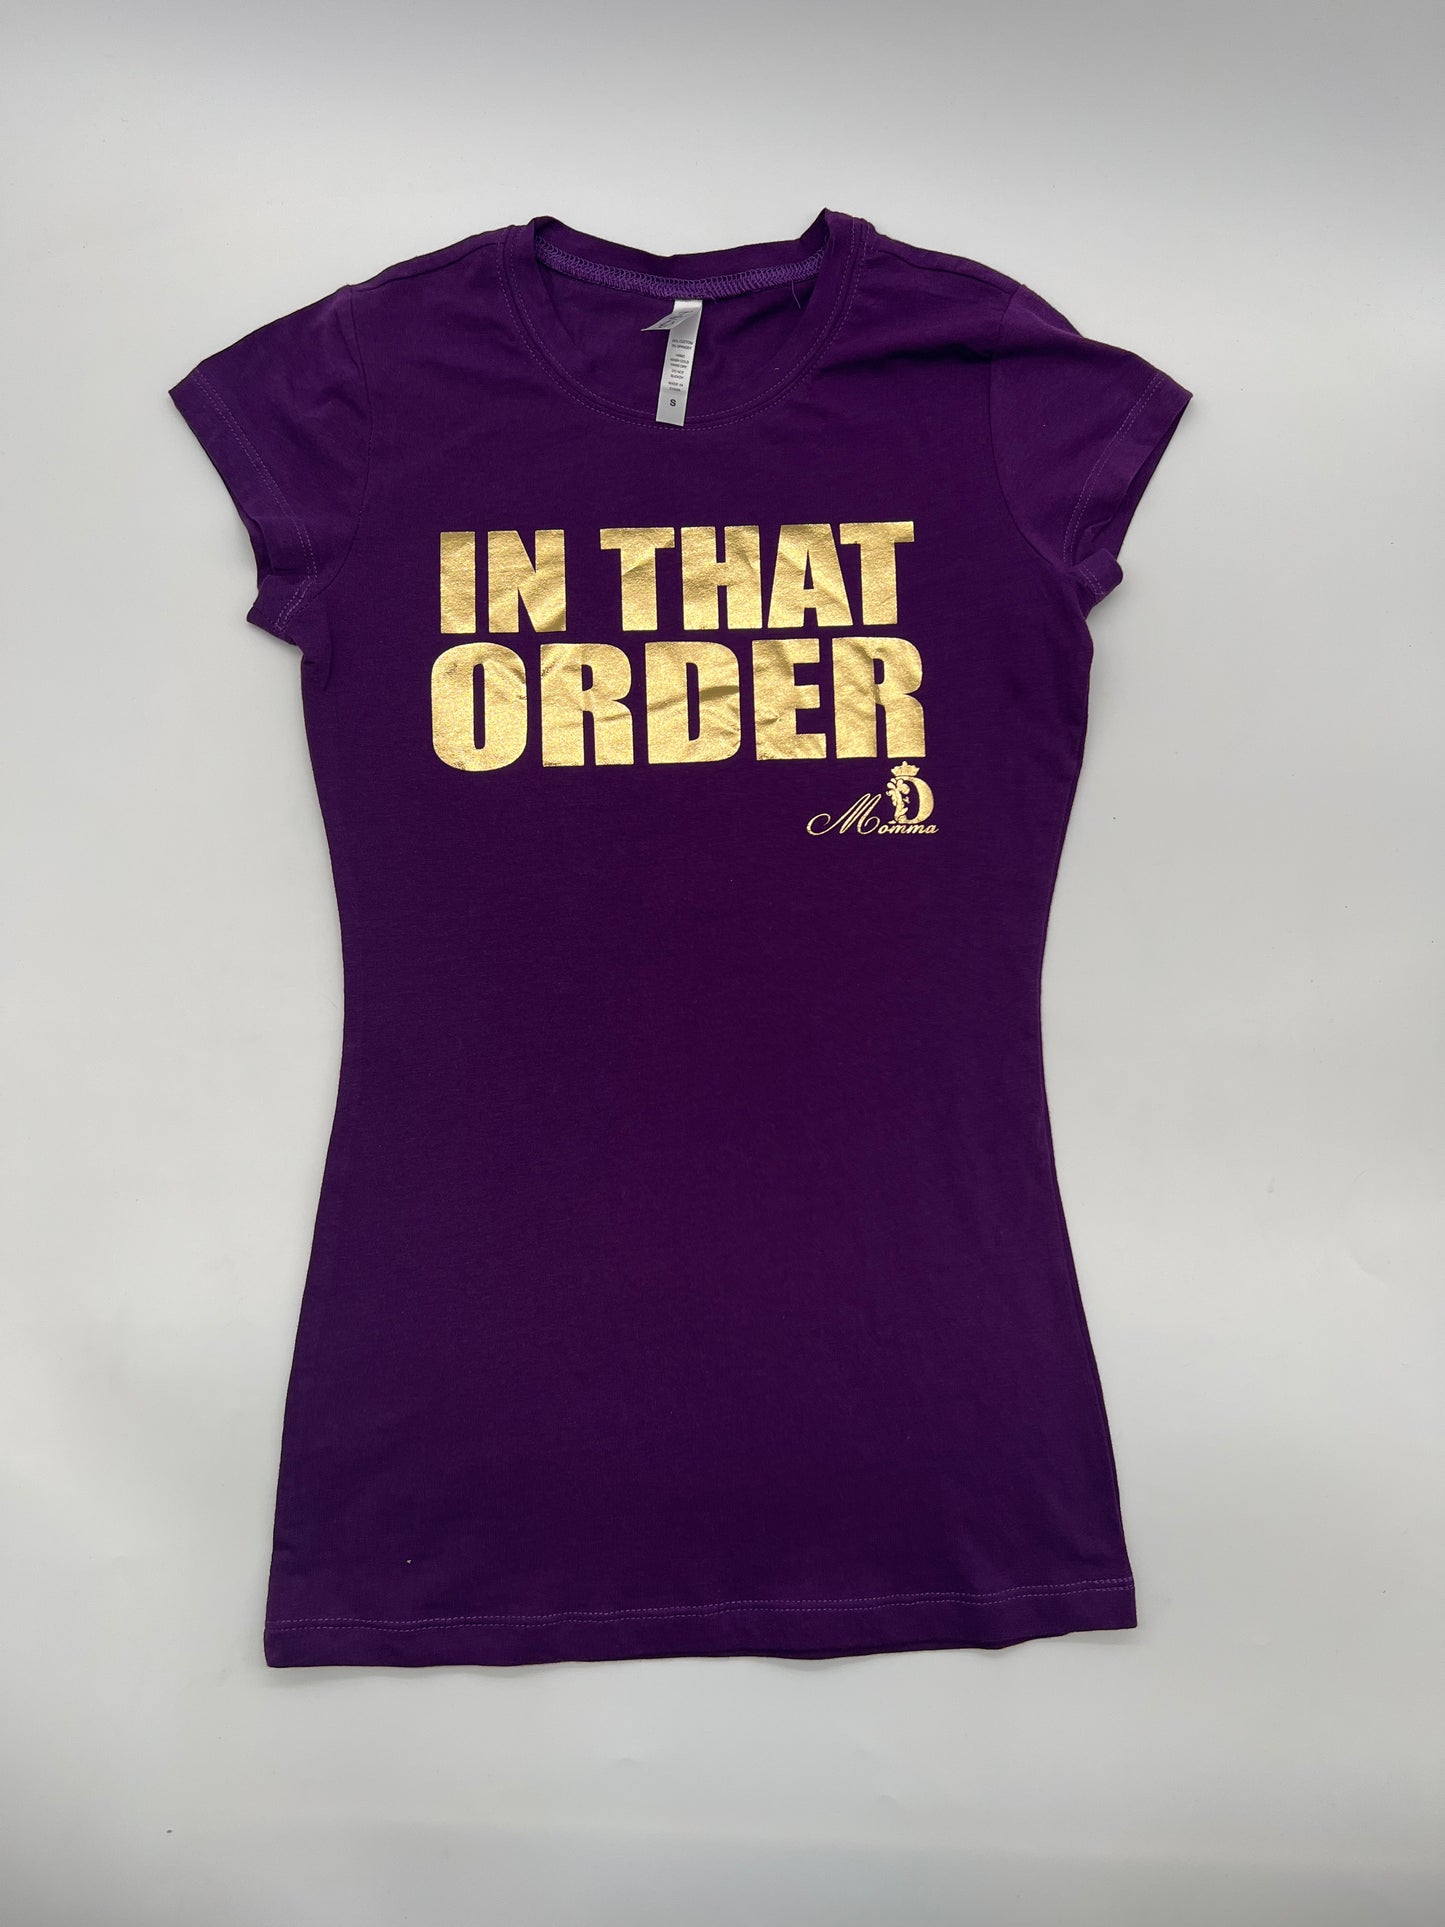 PURPLE & GOLD "In That Order" Tee